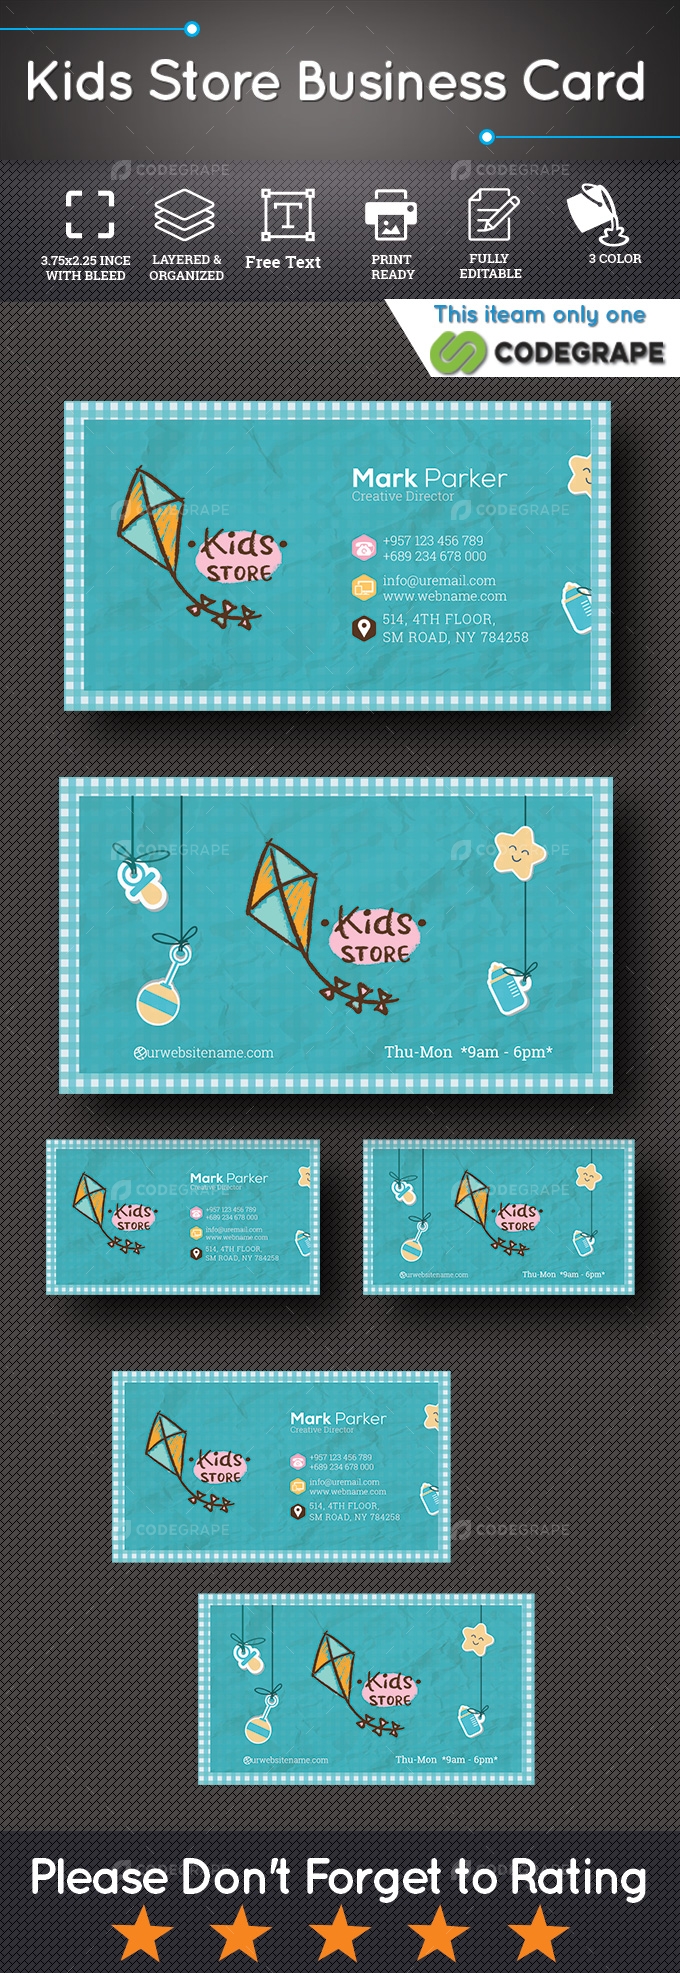 Kids Store Business Card